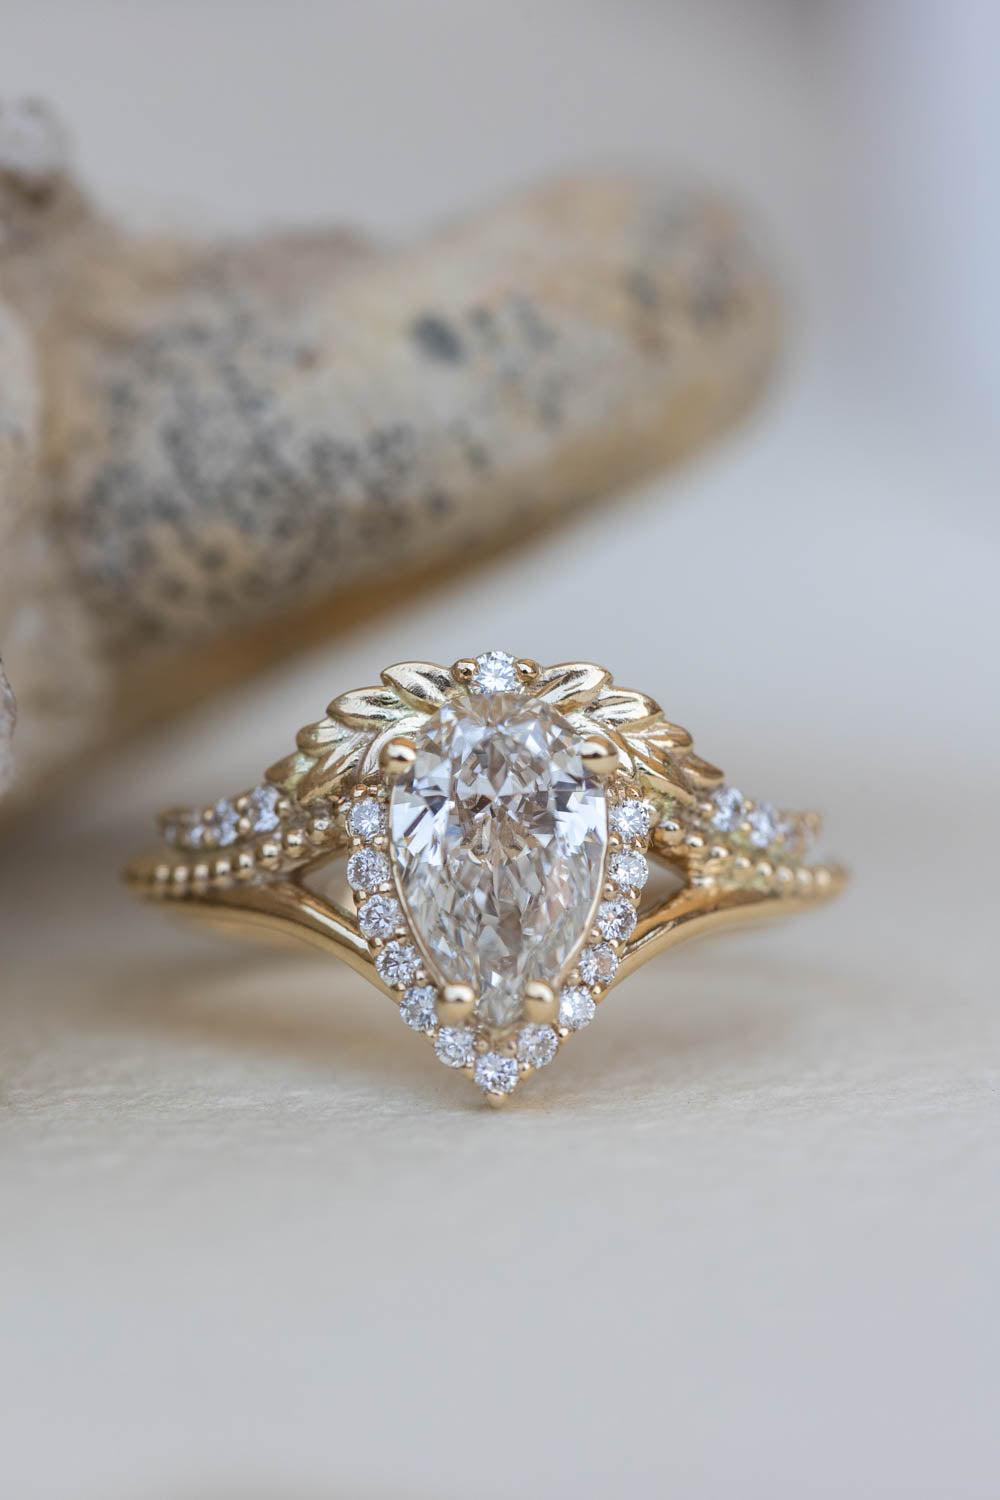 READY TO SHIP: Lyonella ring in 14K yellow gold, lab grown diamond pear cut 9x6* mm, accents lab grown diamonds, AVAILABLE RING SIZES: 6-8US - Eden Garden Jewelry™